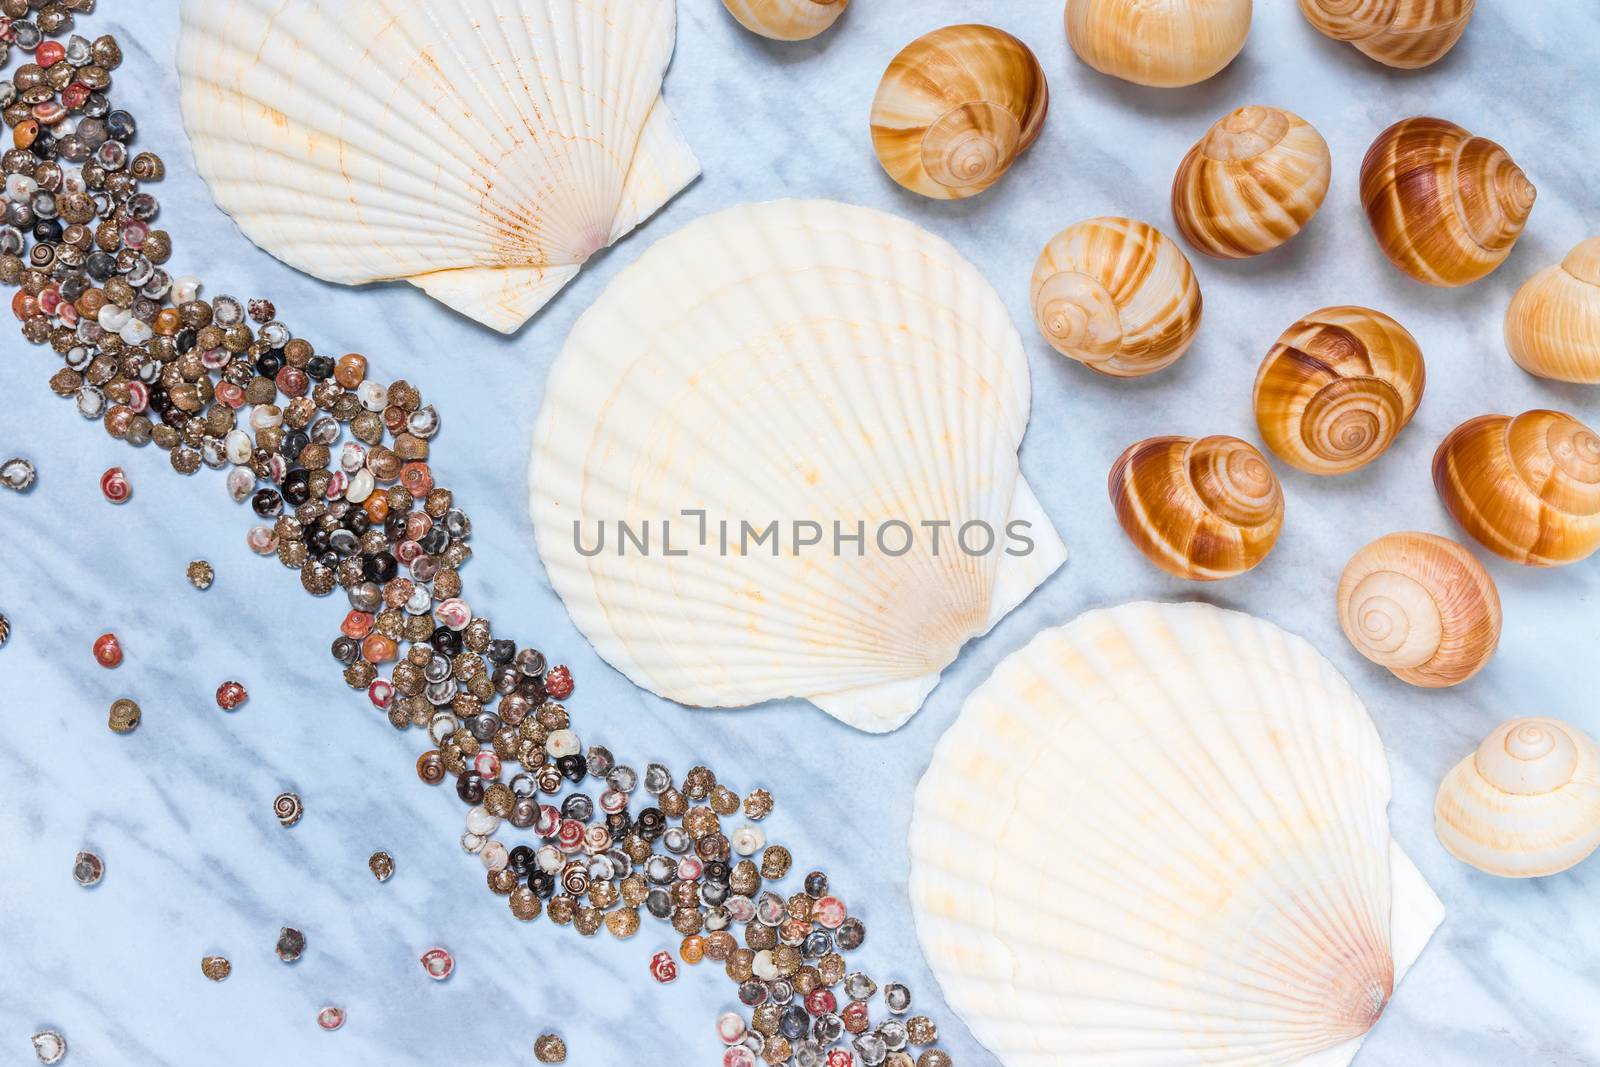 Seashells of different sizes on blue marble background. Flat lay composition.